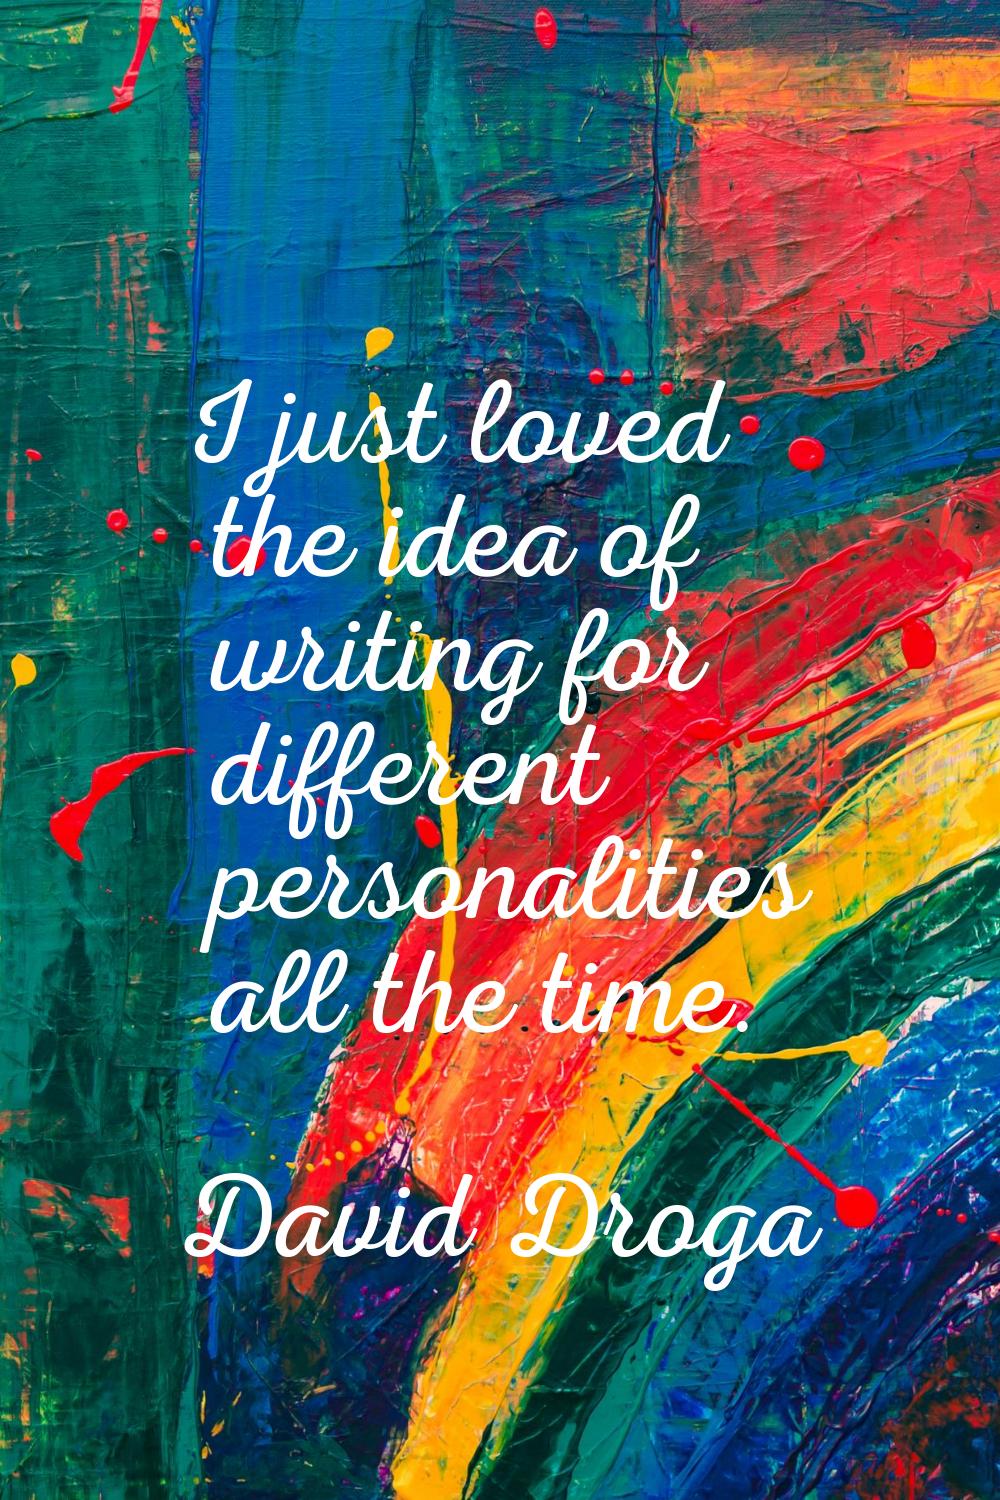 I just loved the idea of writing for different personalities all the time.